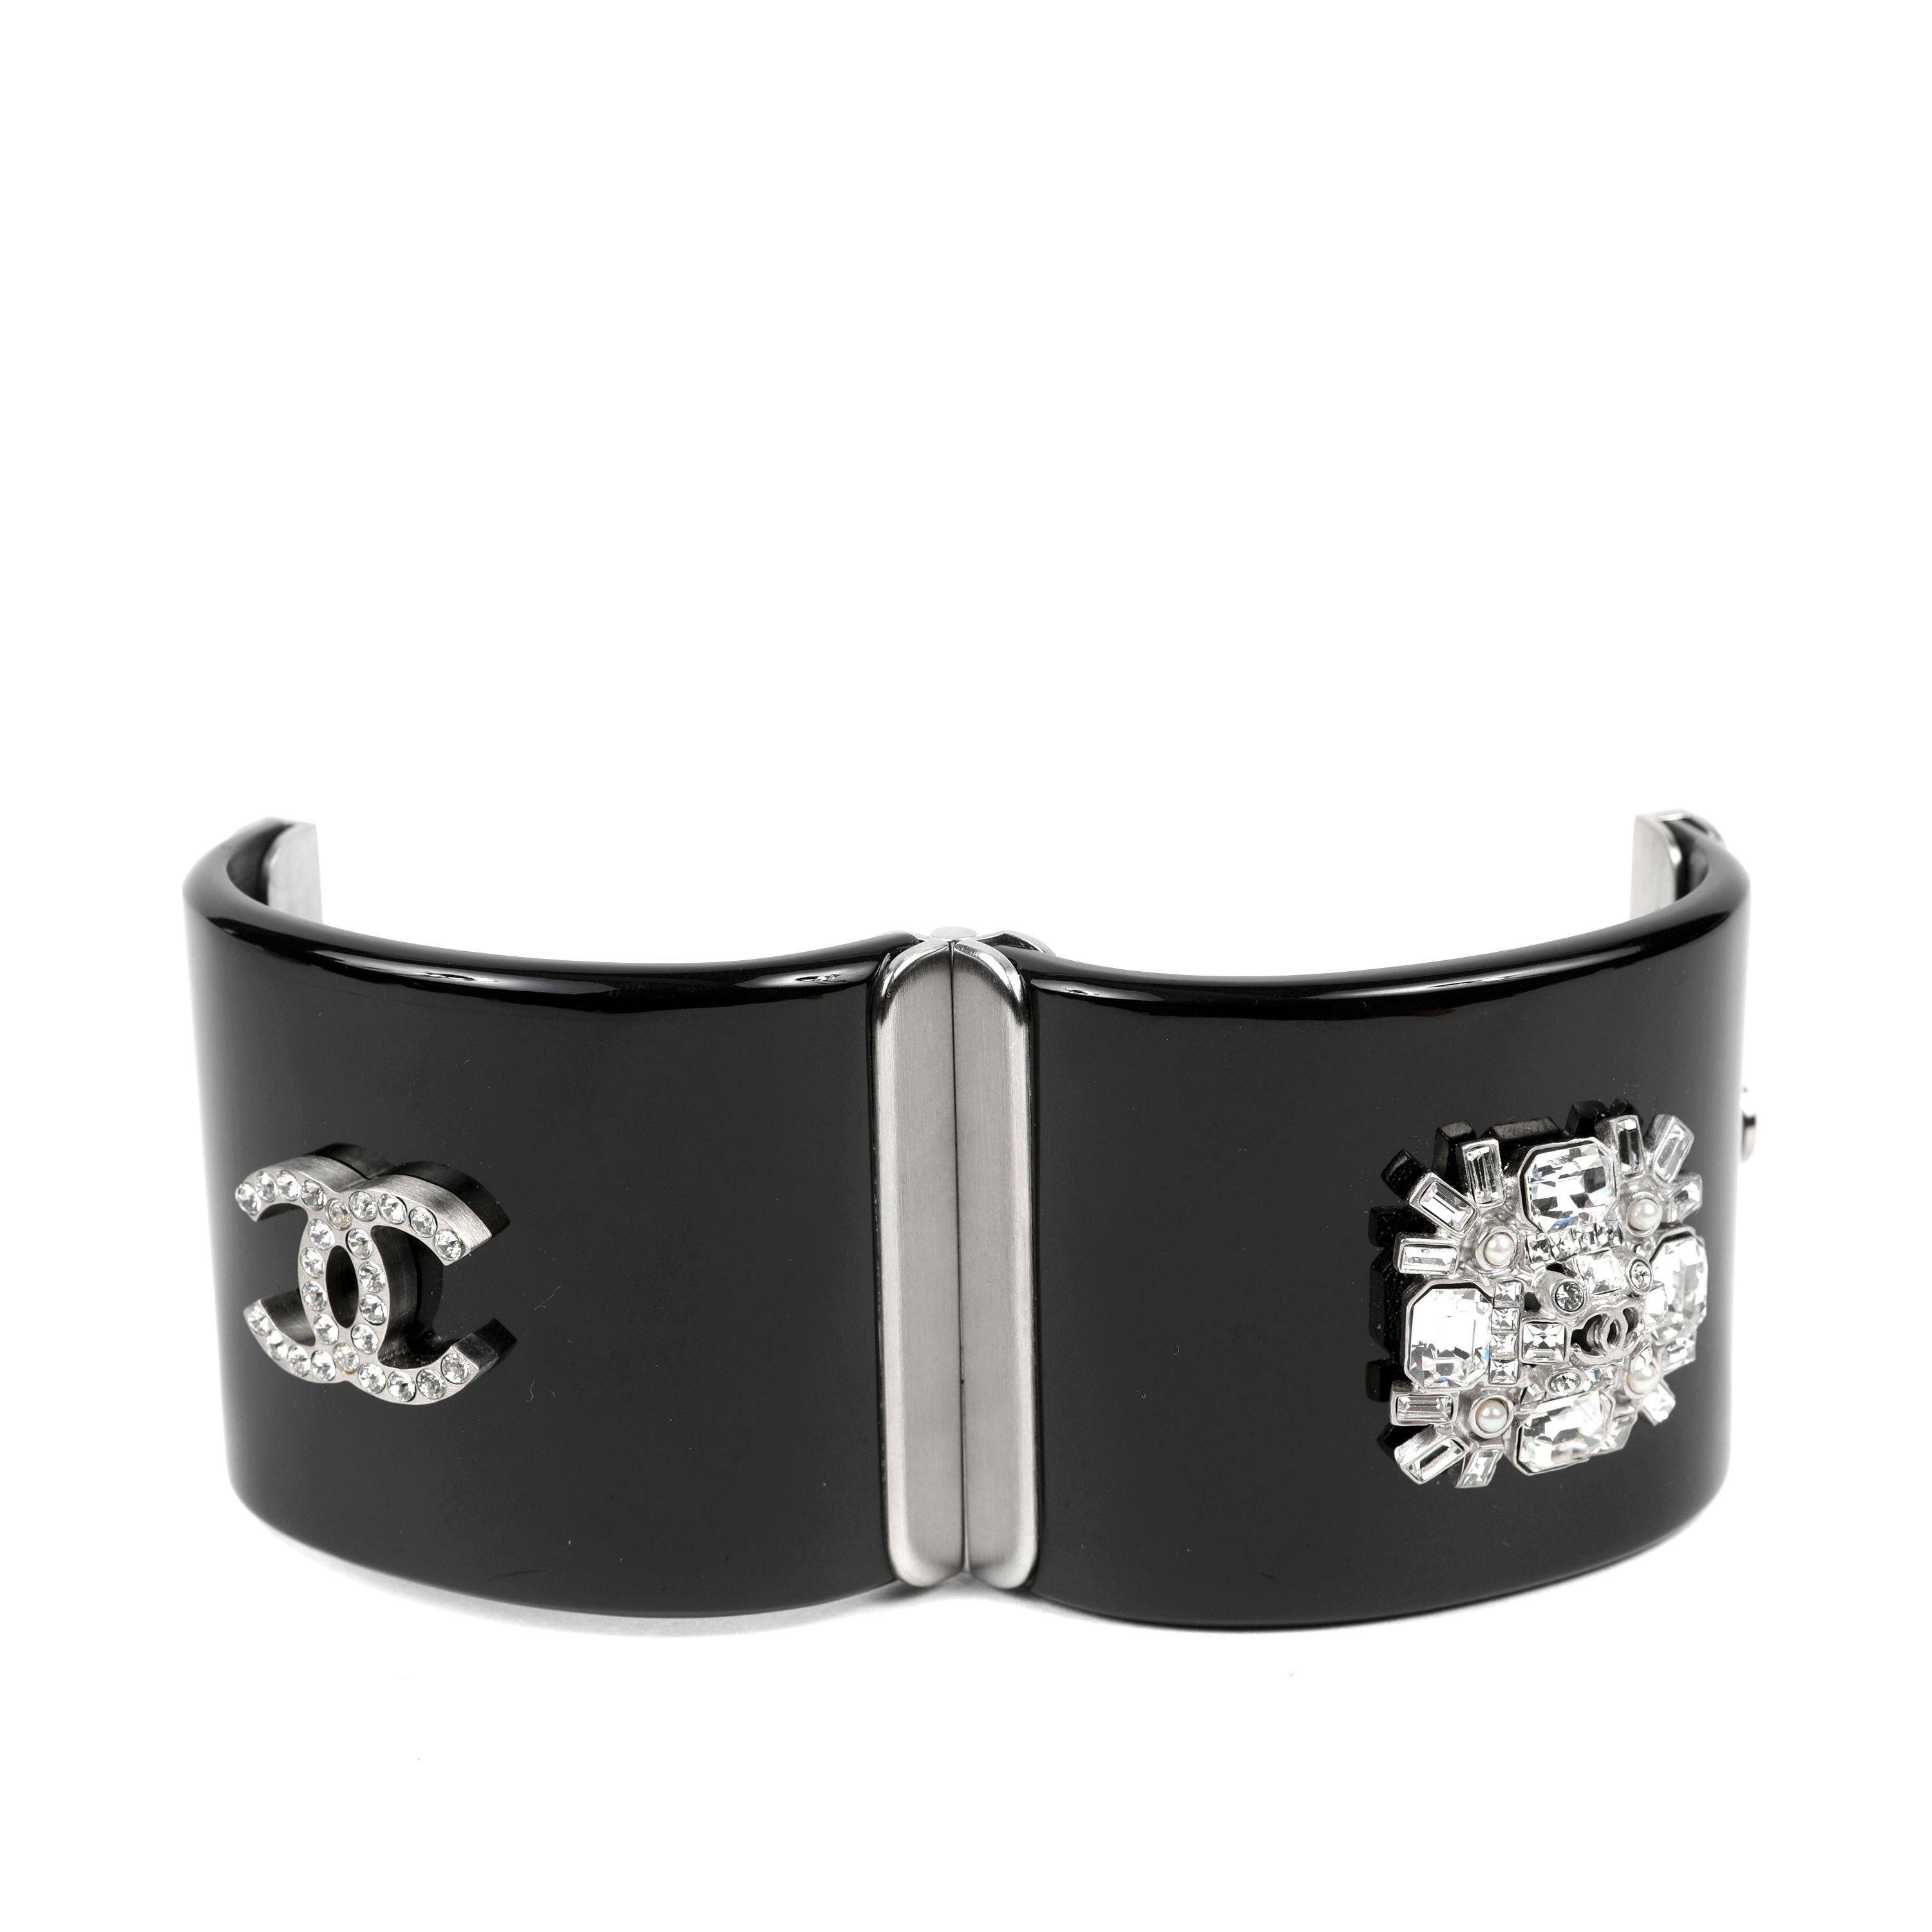 This authentic. Chanel Black Resin Crystal Verre Crest Cuff is pristine.  Wide black resin hinged cuff with crystal CC and crest. Silver hardware clasp.  Pouch or box included. 

PBF 13952
